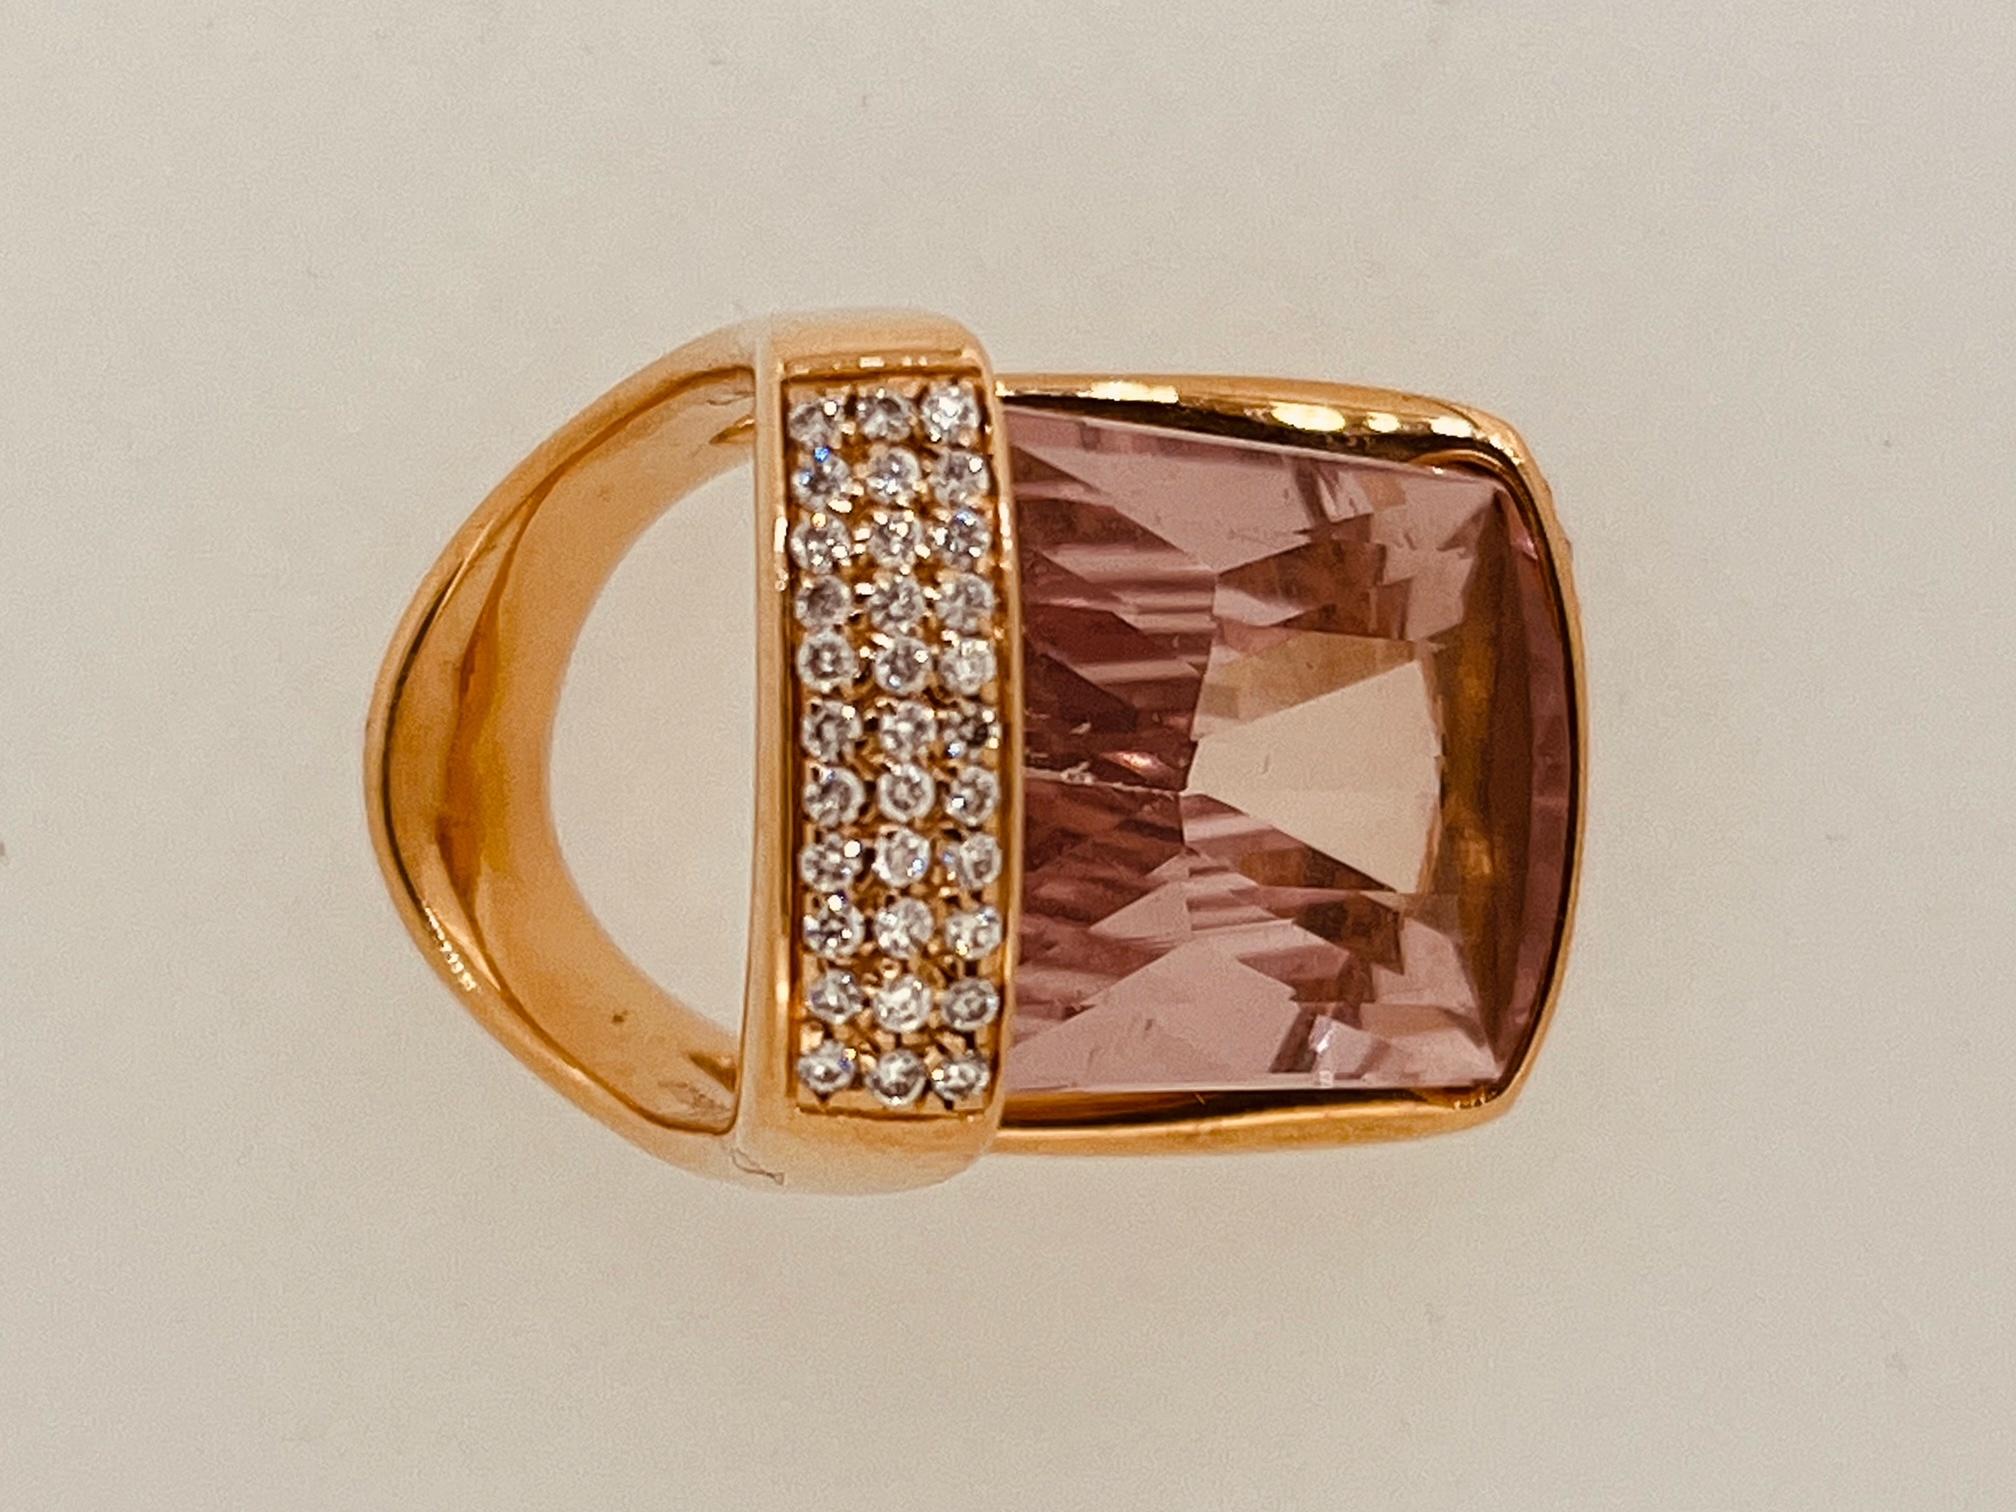 18ct Gold Ring Centering a Square Cut Morganite Suspended by 0.9ct Pave Diamonds For Sale 3